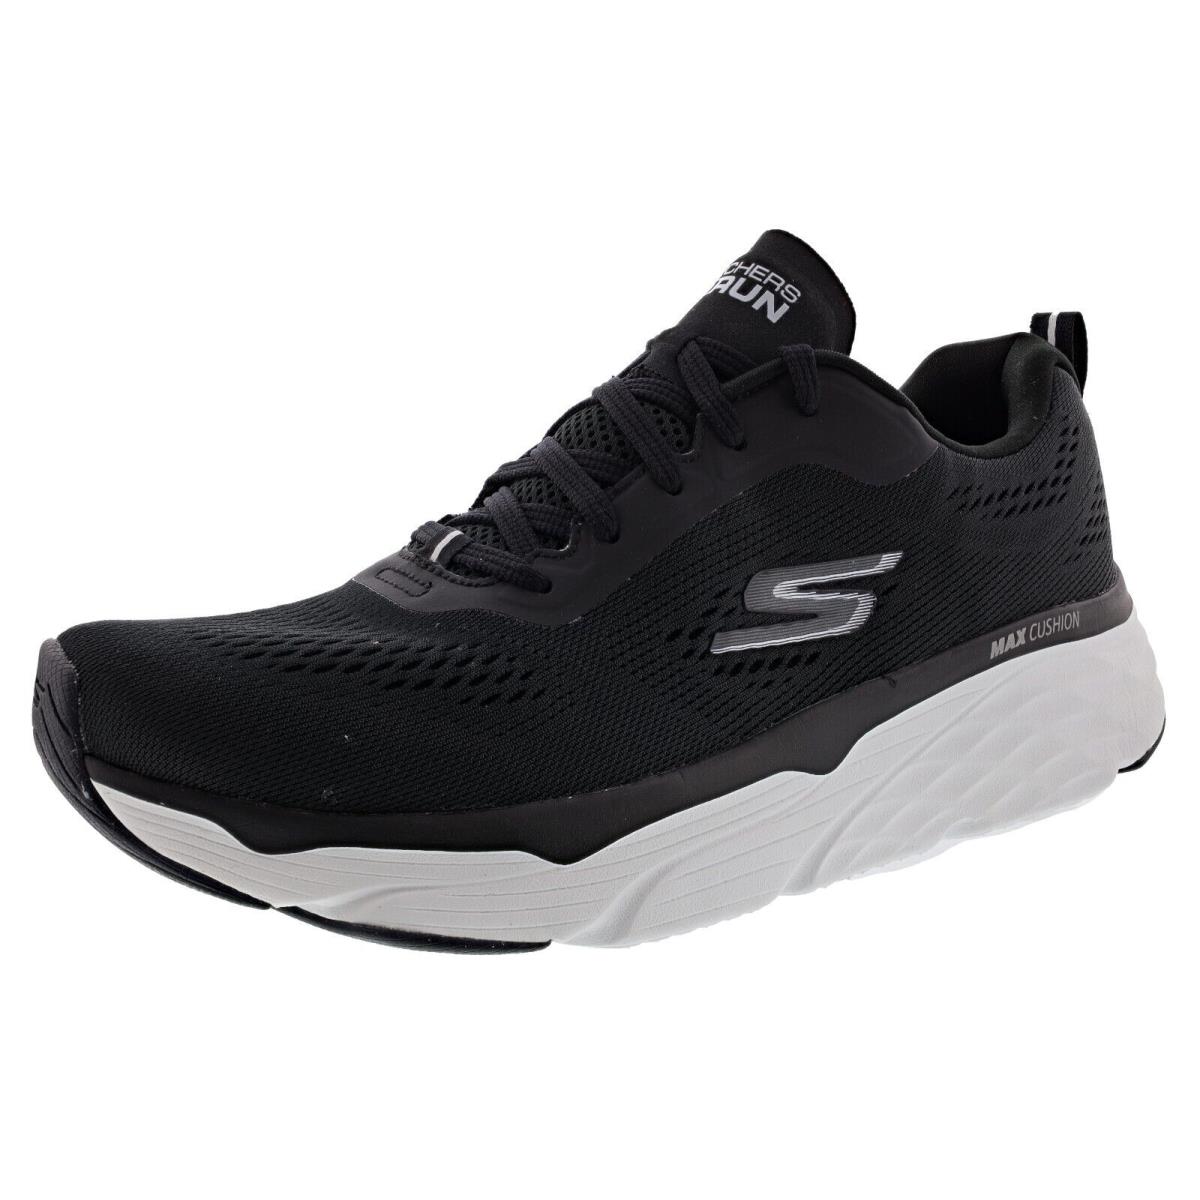 Skechers Men`s Max Cushioning Elite Terminus 220387BKW Lace-up Running Shoes